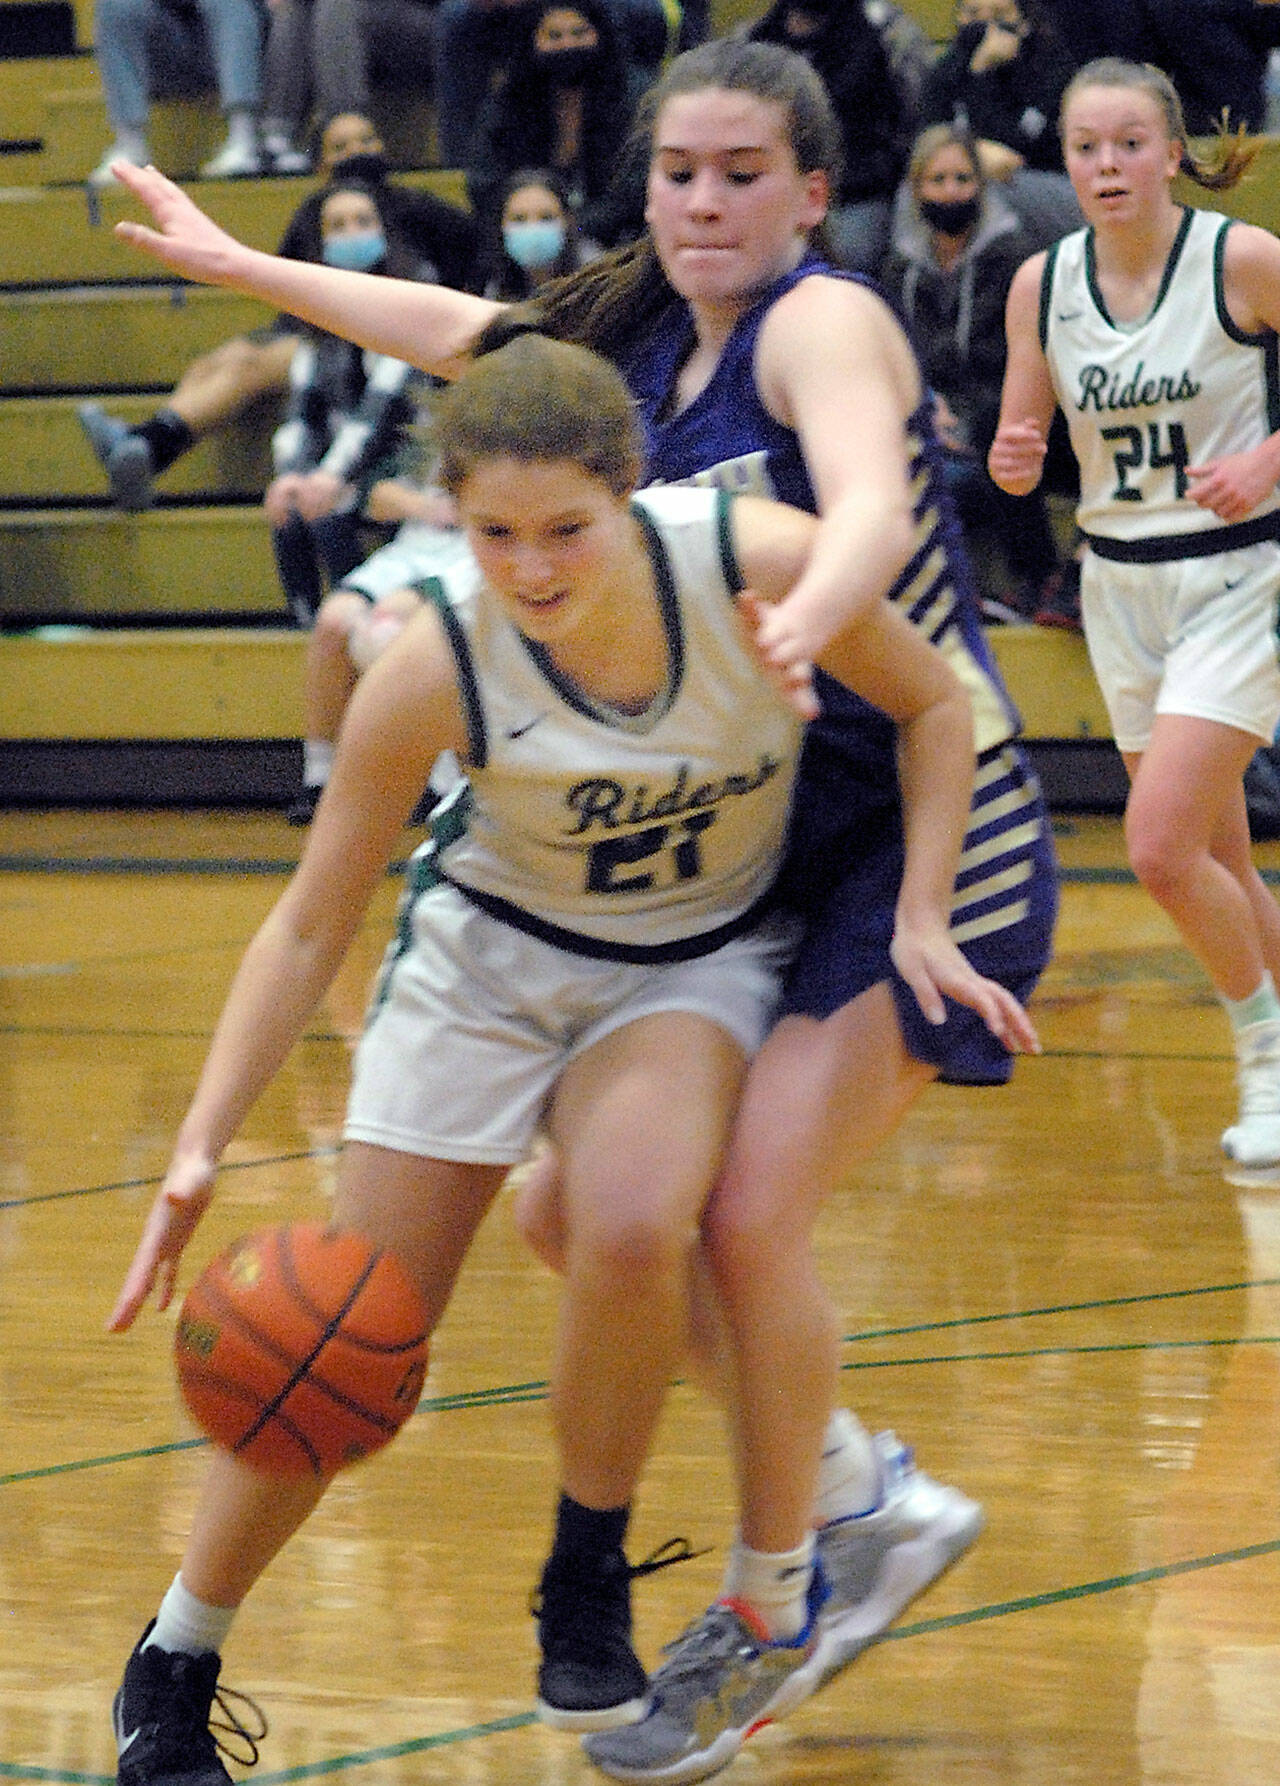 Keith Thorpe/Peninsula Daily News
Port Angeles' Jayde Gedelman, front, fends of the advances of Nort Kitsap's Sophia Baugh as Gedelman's teammate, Anna Petty, left, looks on during Thursday's game in Port Angeles.